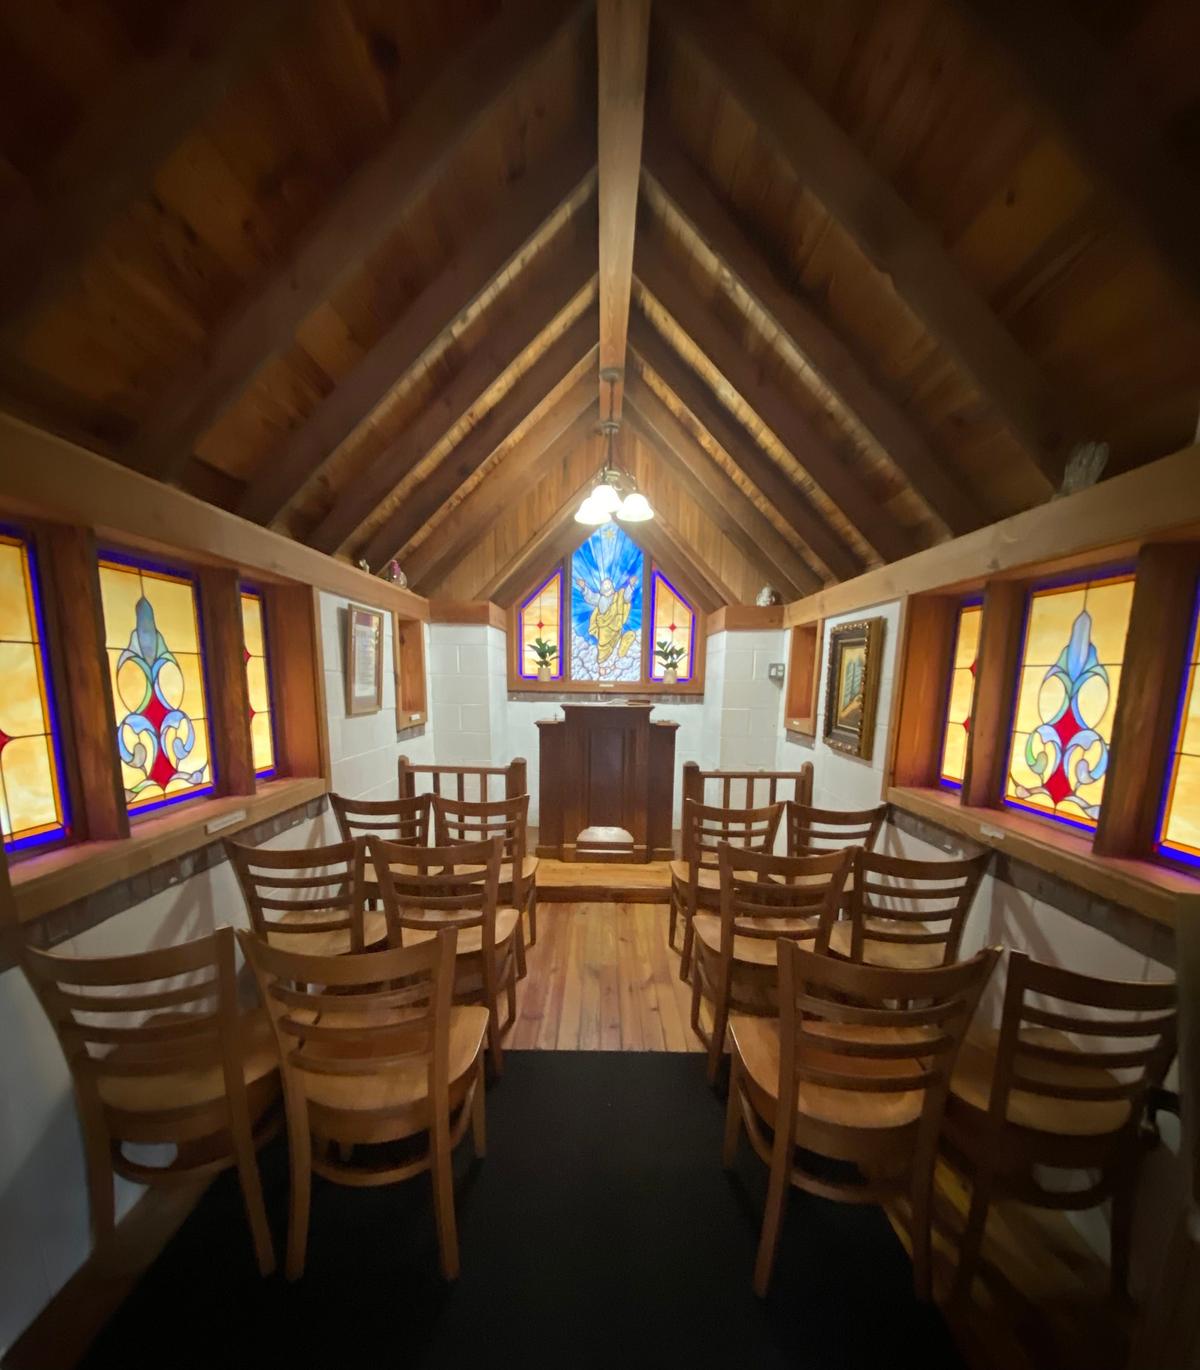 Located in Townsend, Georgia, the Smallest Church in the United States is a nondenominational, 12-seat church built in 1949. (Ligaya Figueras/The Atlanta Journal-Constitution/TNS)